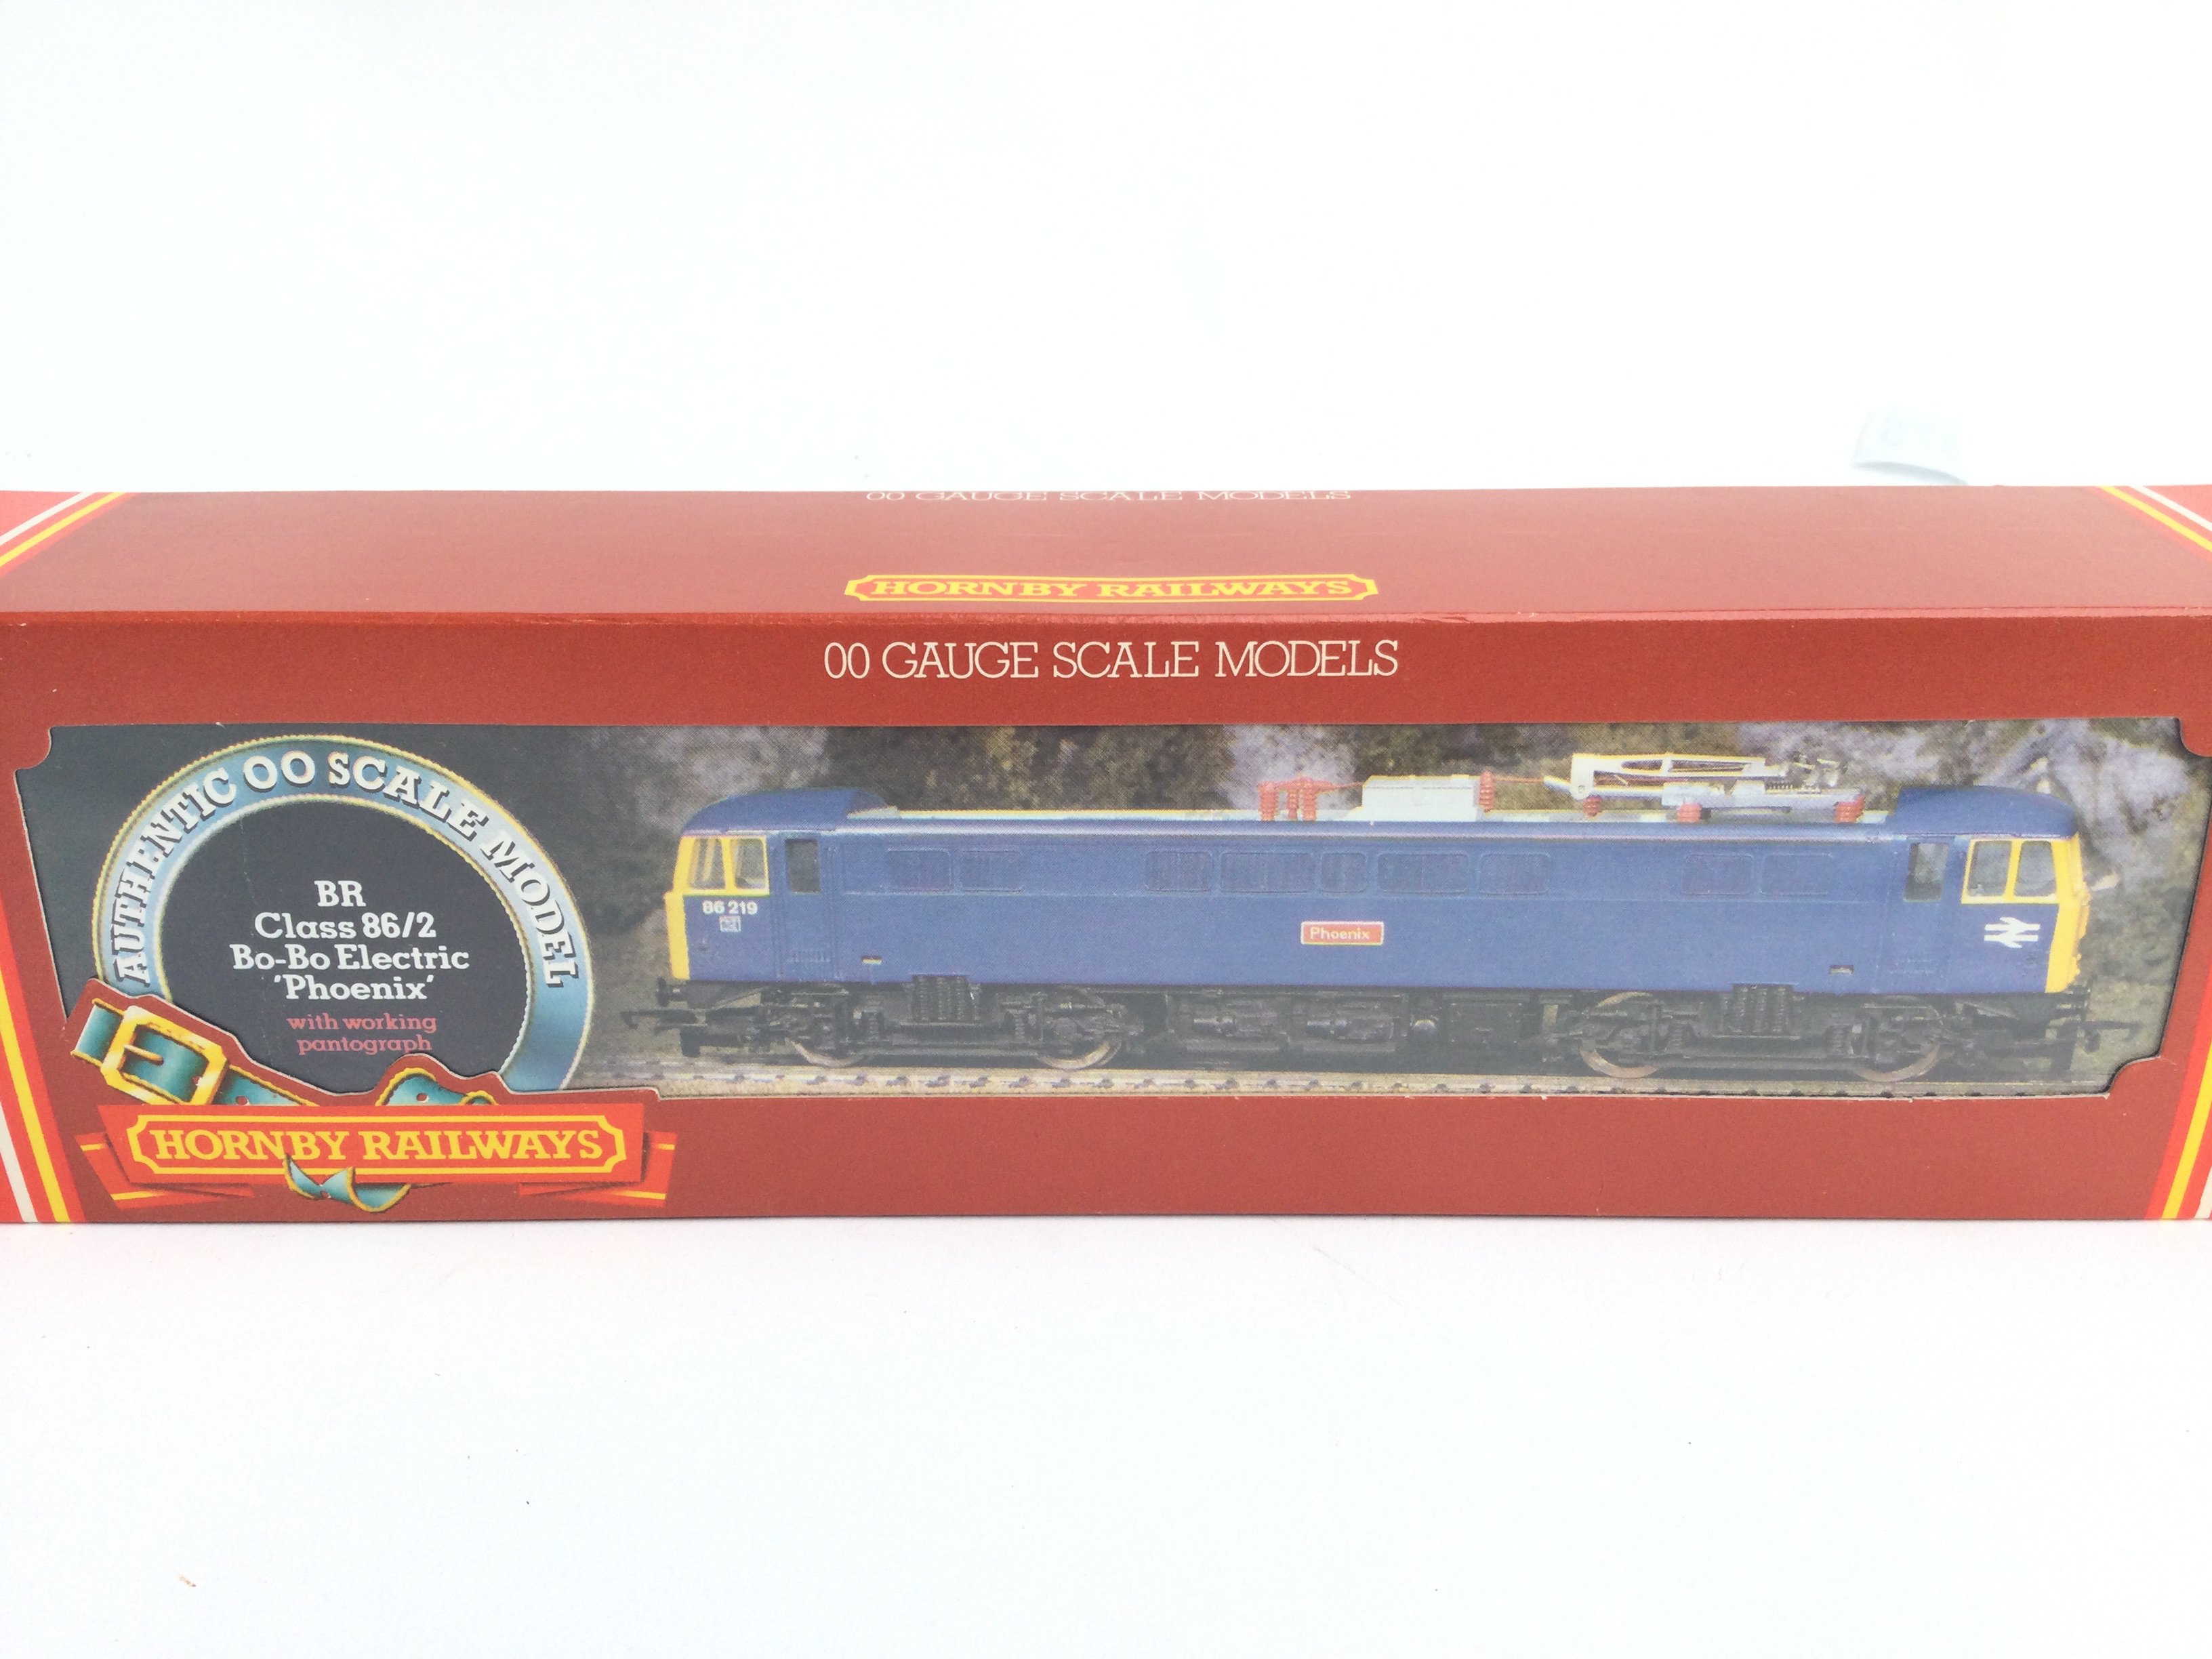 A Boxed Hornby 00 Gauge BR Class 86/2 Electric Pho - Image 2 of 3